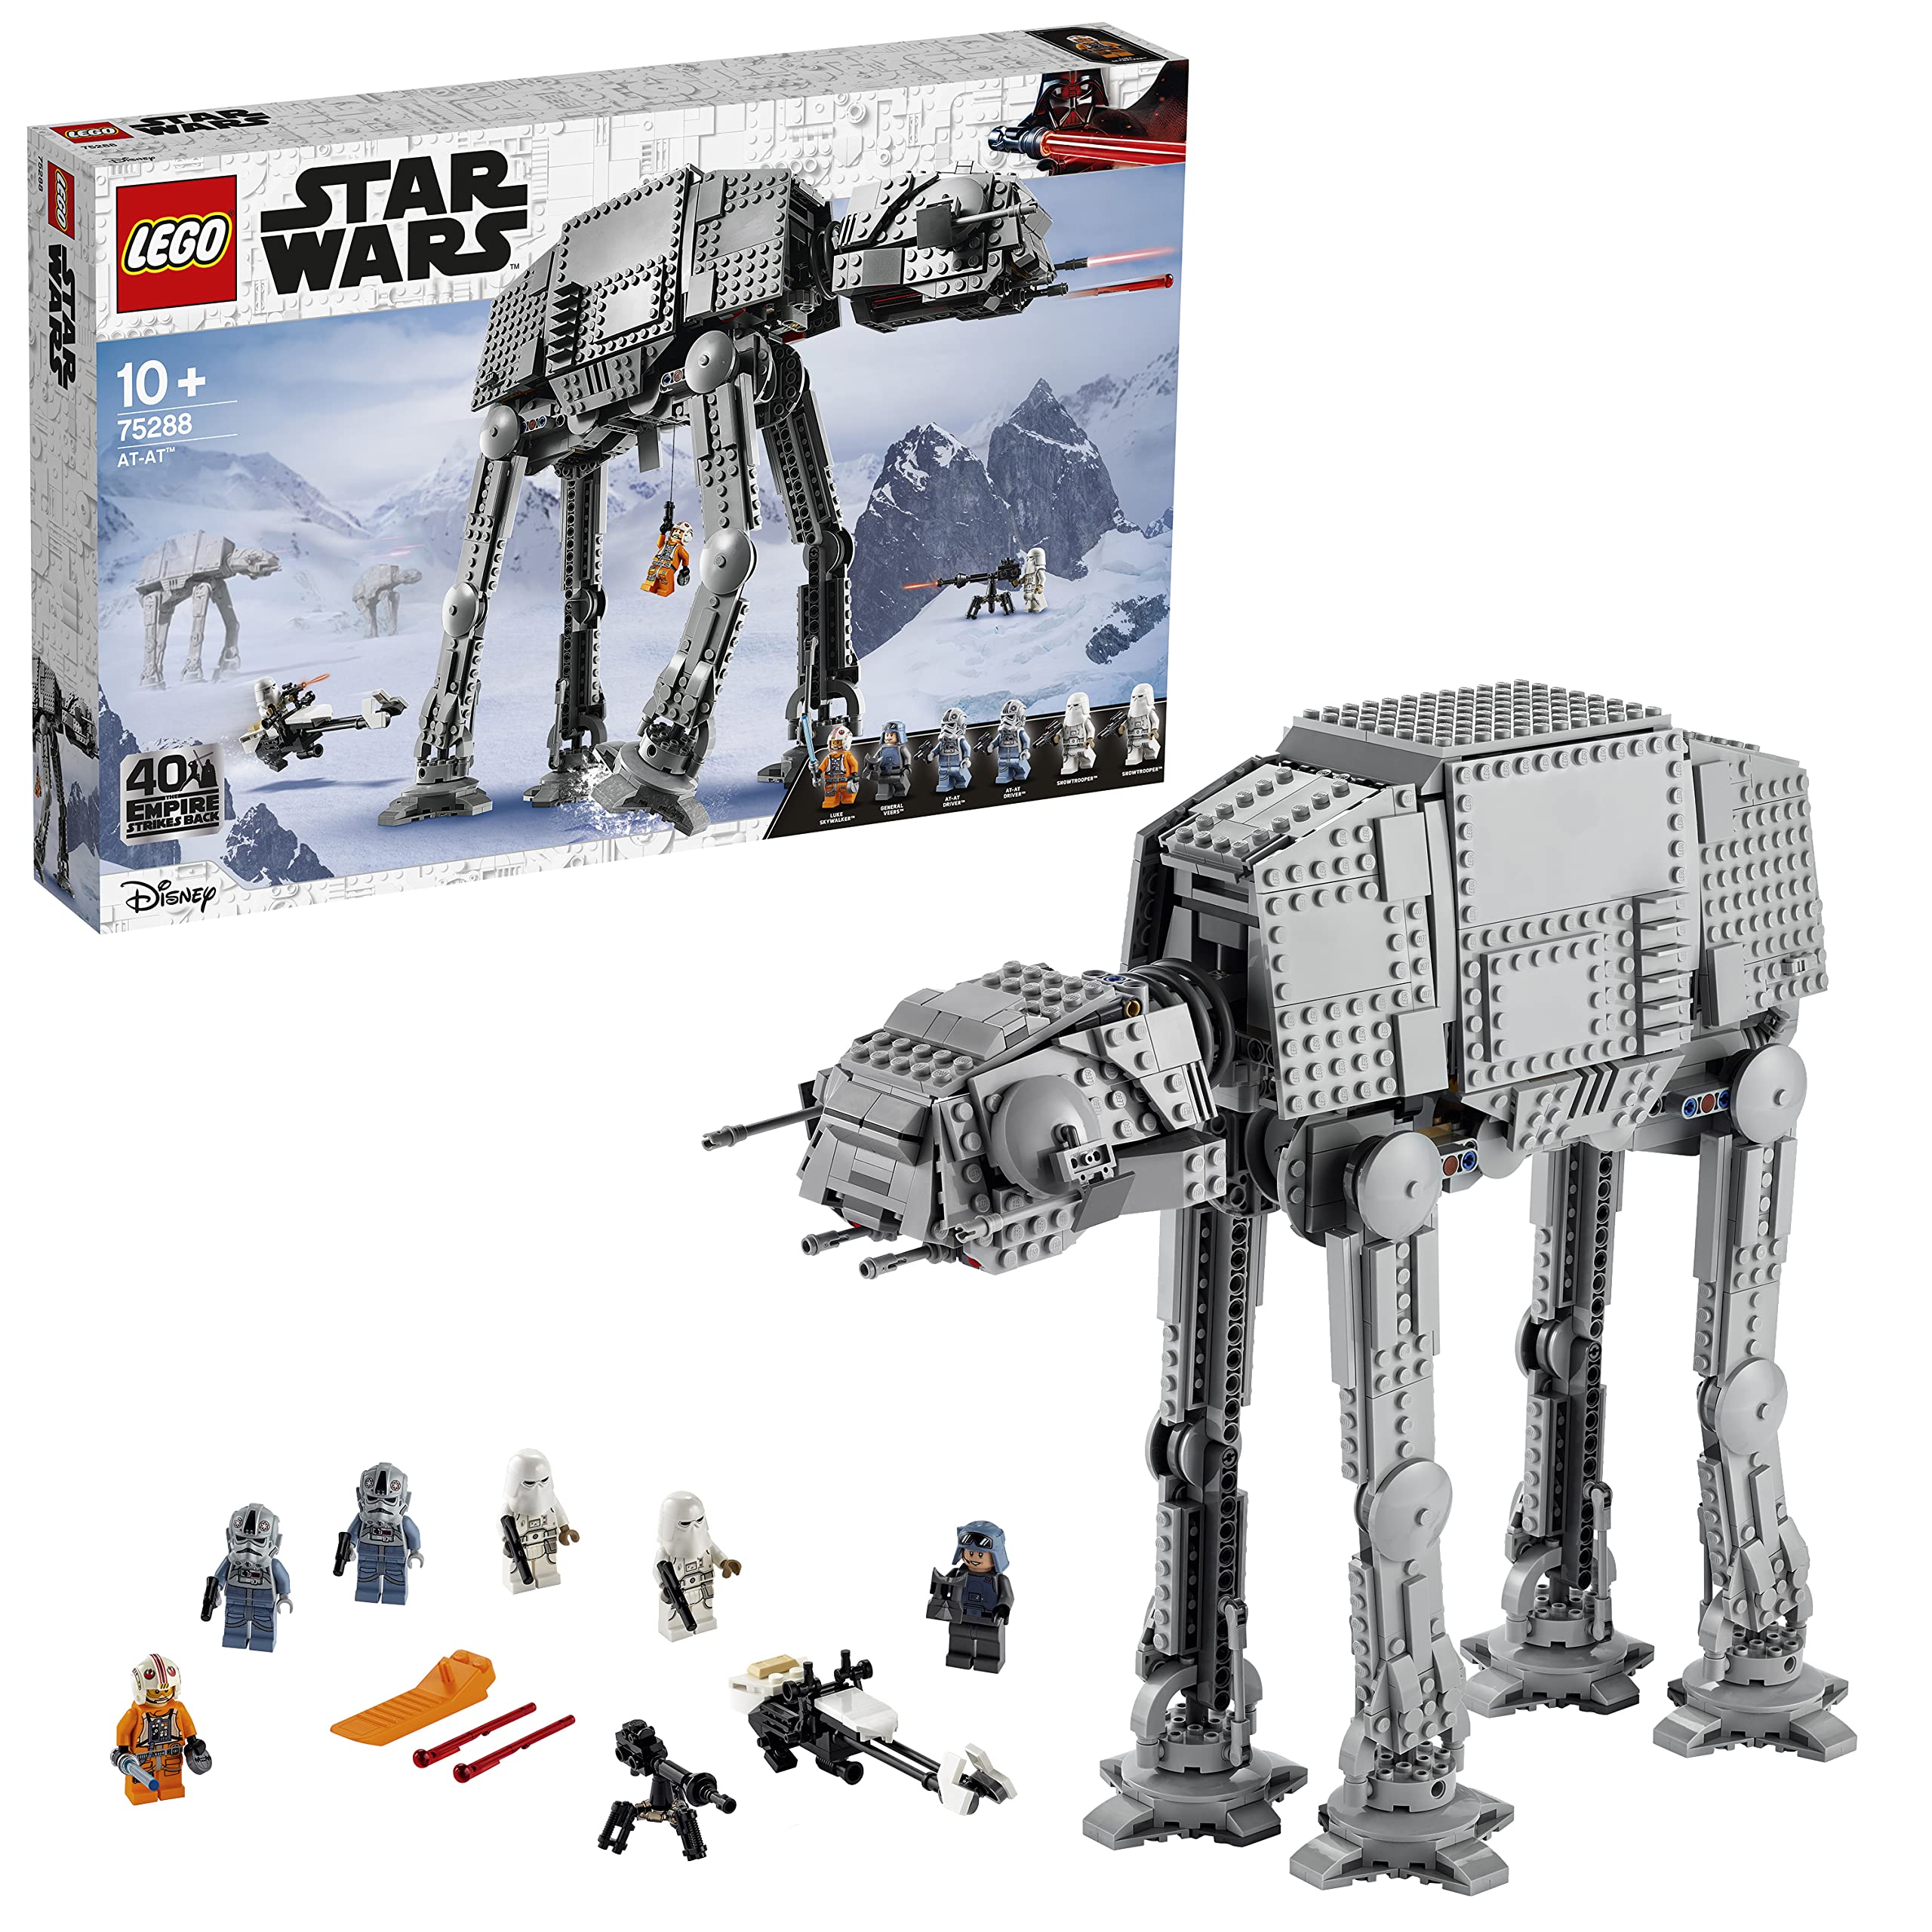 LEGO® Star Wars™ AT-AT™ 75288 Building Kit,AT-AT Walker Building Toy;Universe and Recreate Classic Star Wars Trilogy Scenes $170.68+ Free shipping